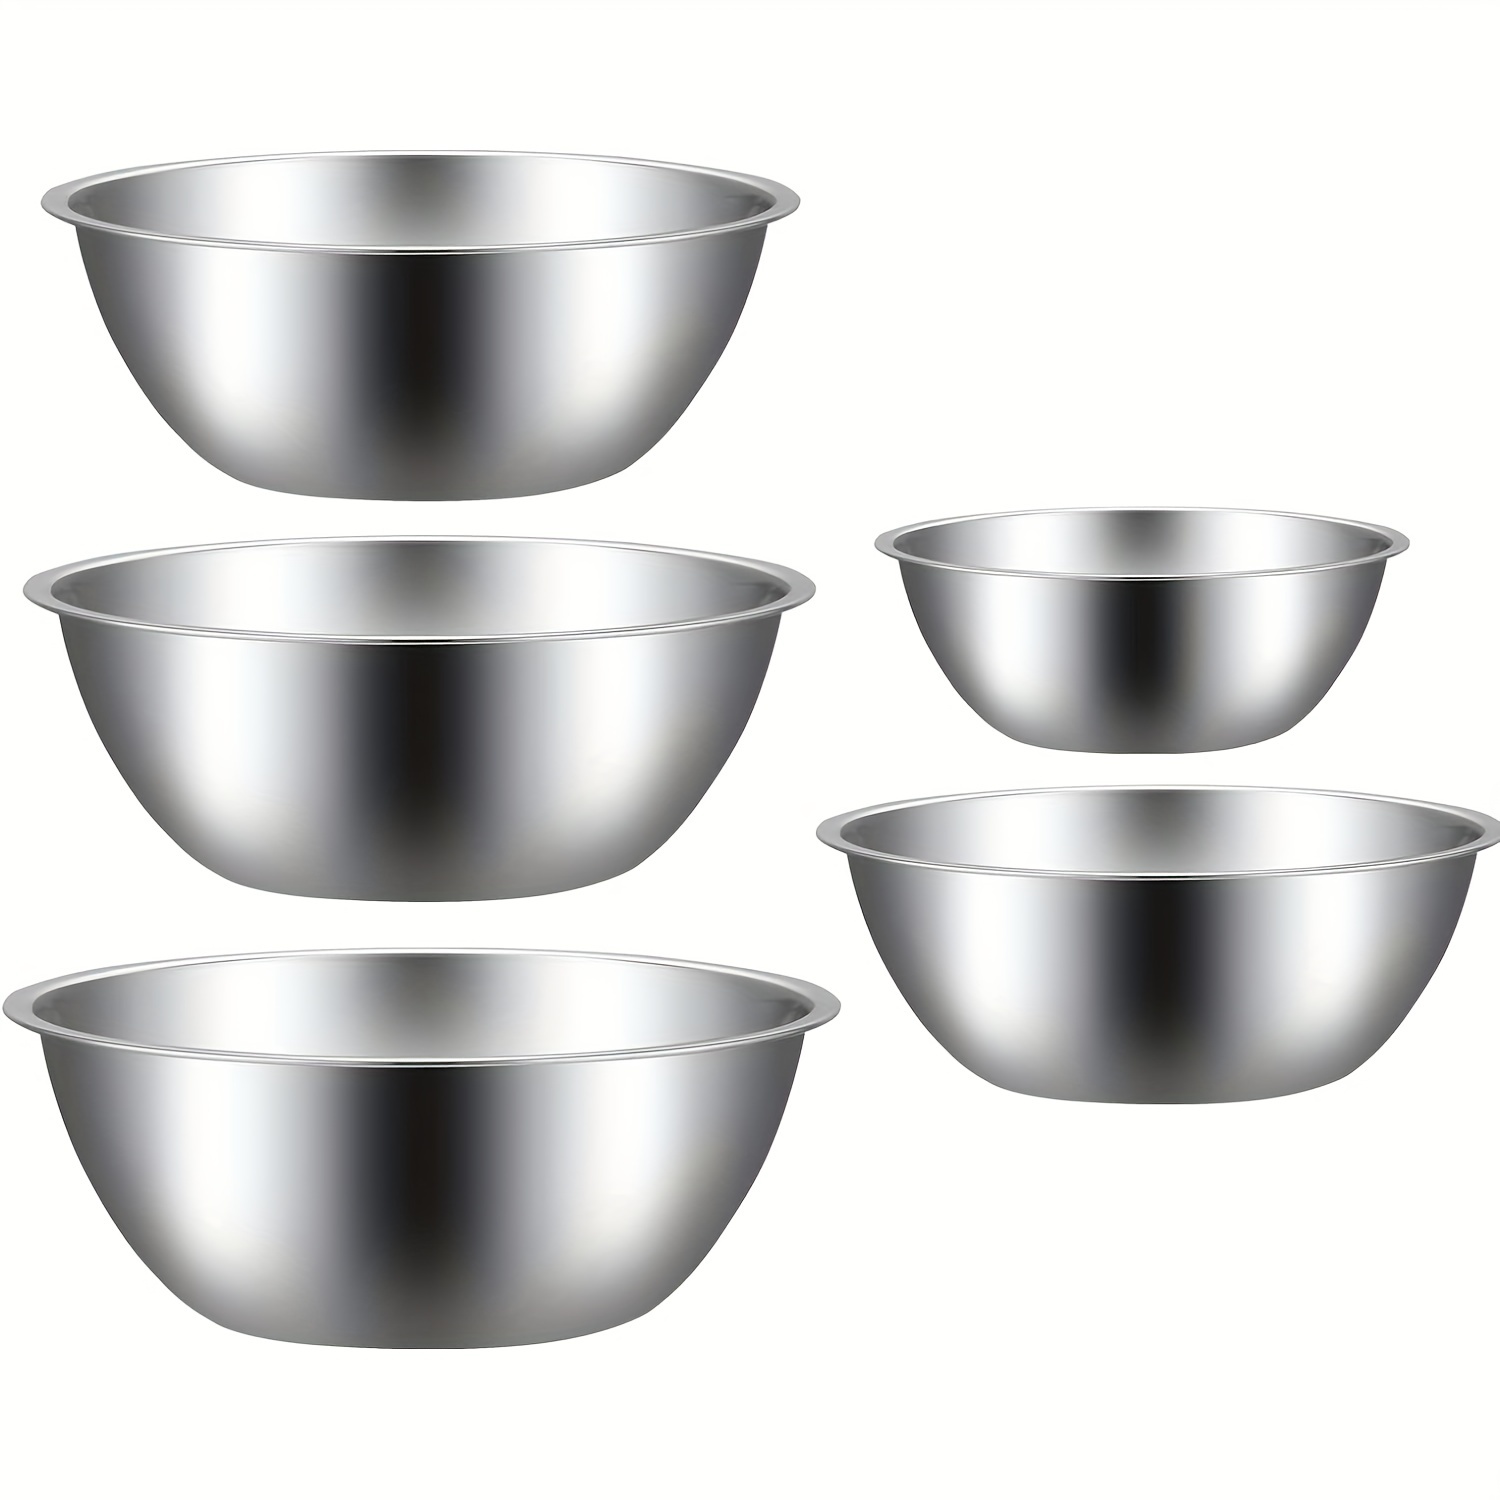 Mixing Bowls with Lids Set, Stainless Steel Mixing Bowls with Airtight  Lids, Nesting Mixing Bowl Set for Space Saving Storage, Ideal for Cooking,  Baking - China Stainless Steel Mixing Bowl and Stainless